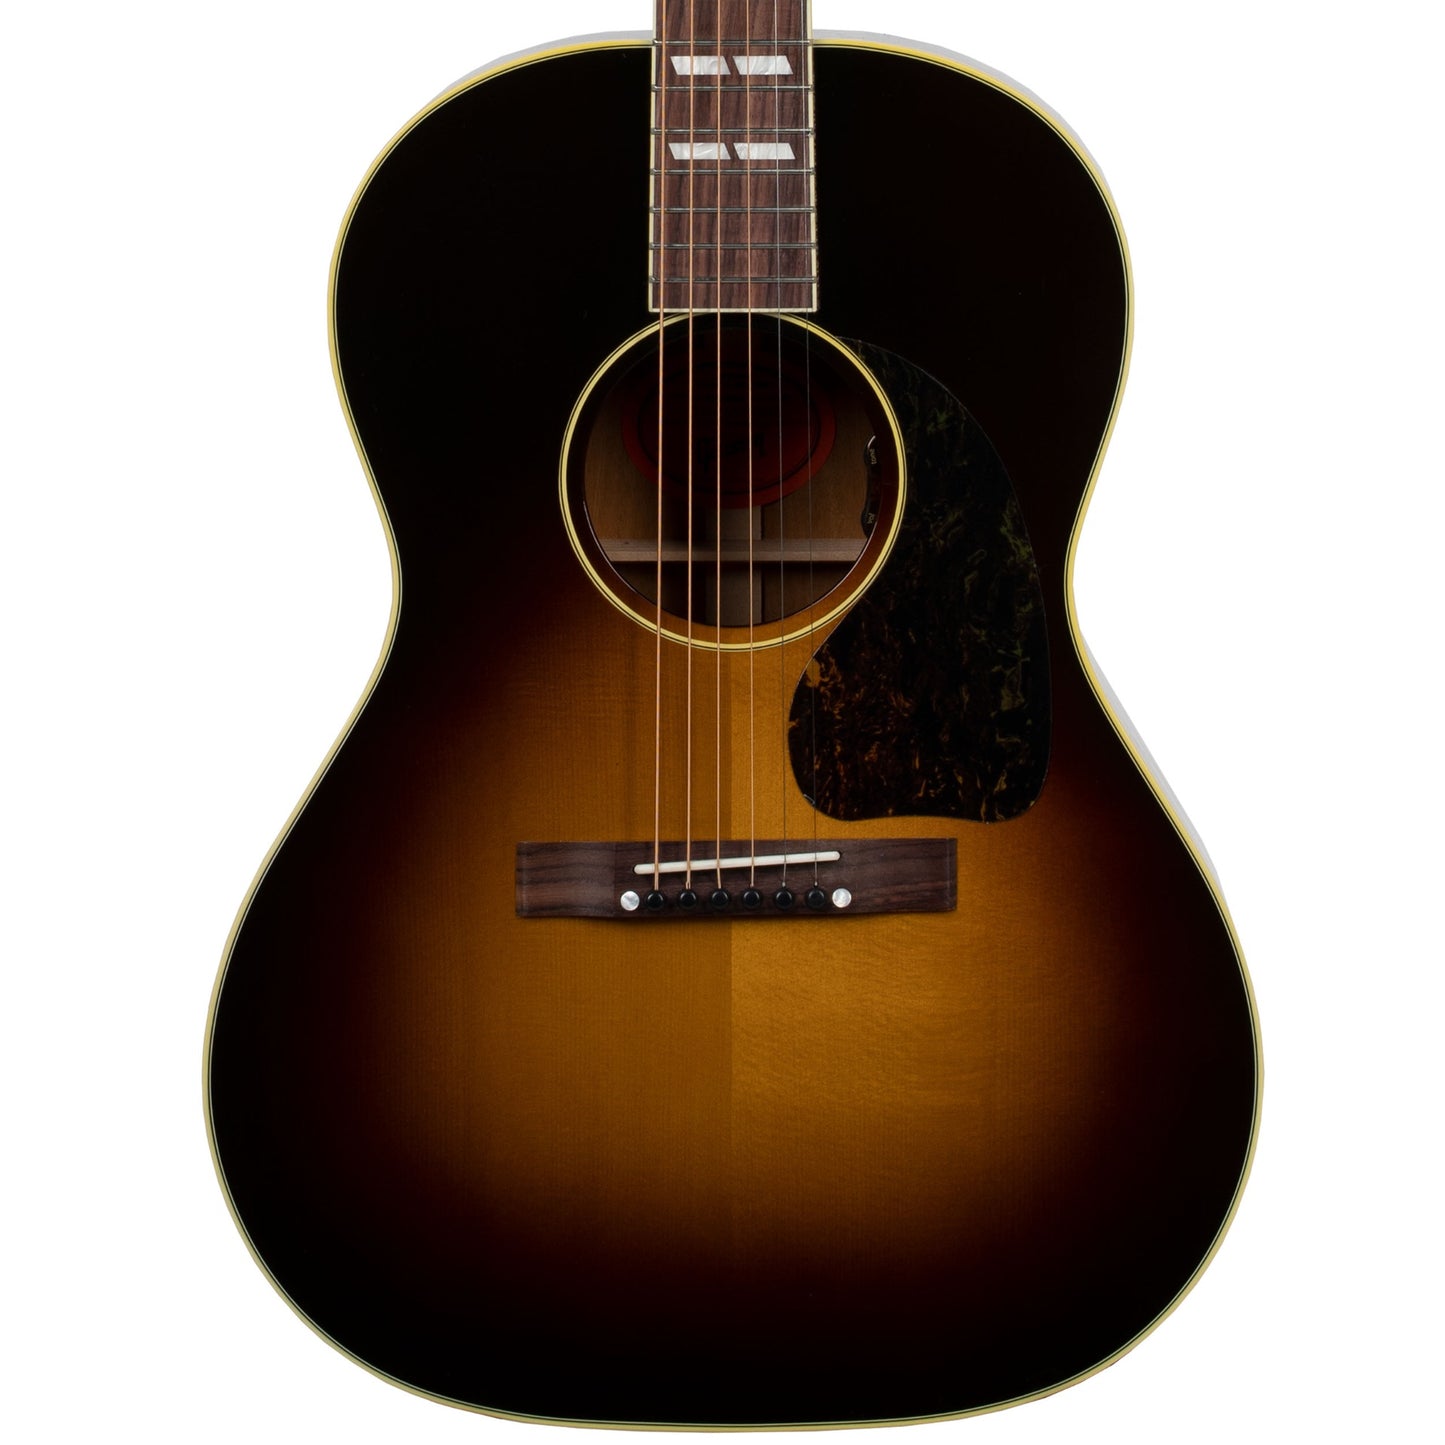 Gibson Nathaniel Rateliff LG-2 Western Acoustic Guitar